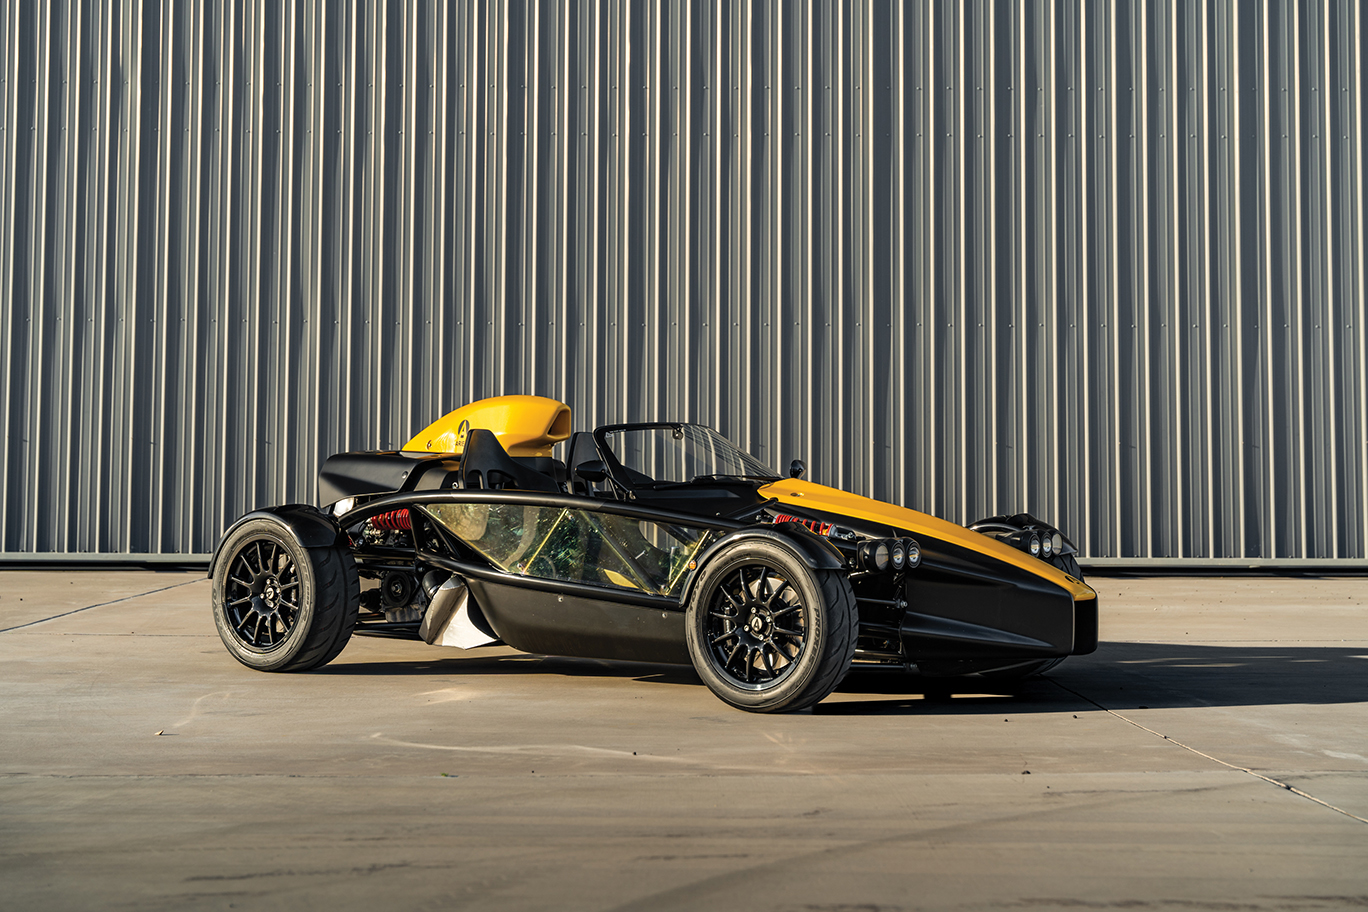 Experience the All-New Ariel Atom 4 at Forman Motorworks